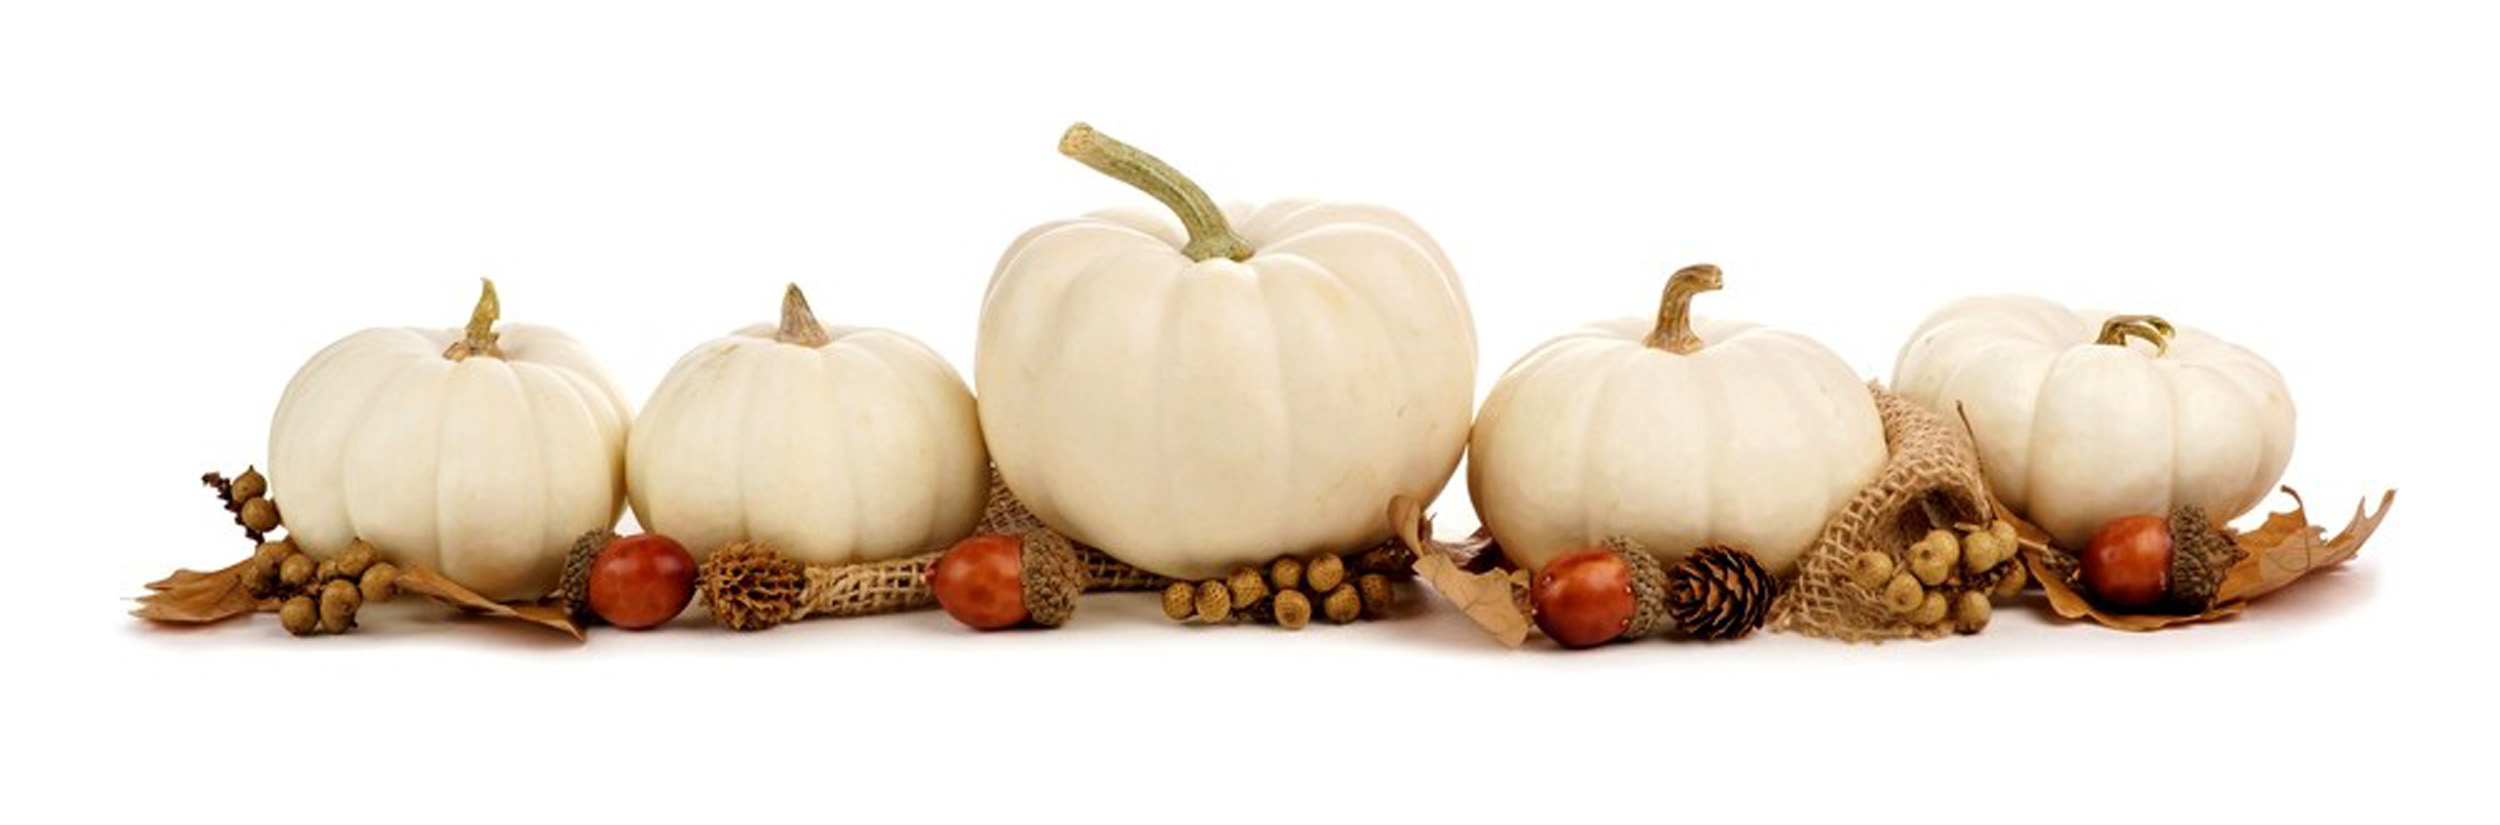 20237 White Pumpkin Stock Photos HighRes Pictures and Images  Getty  Images